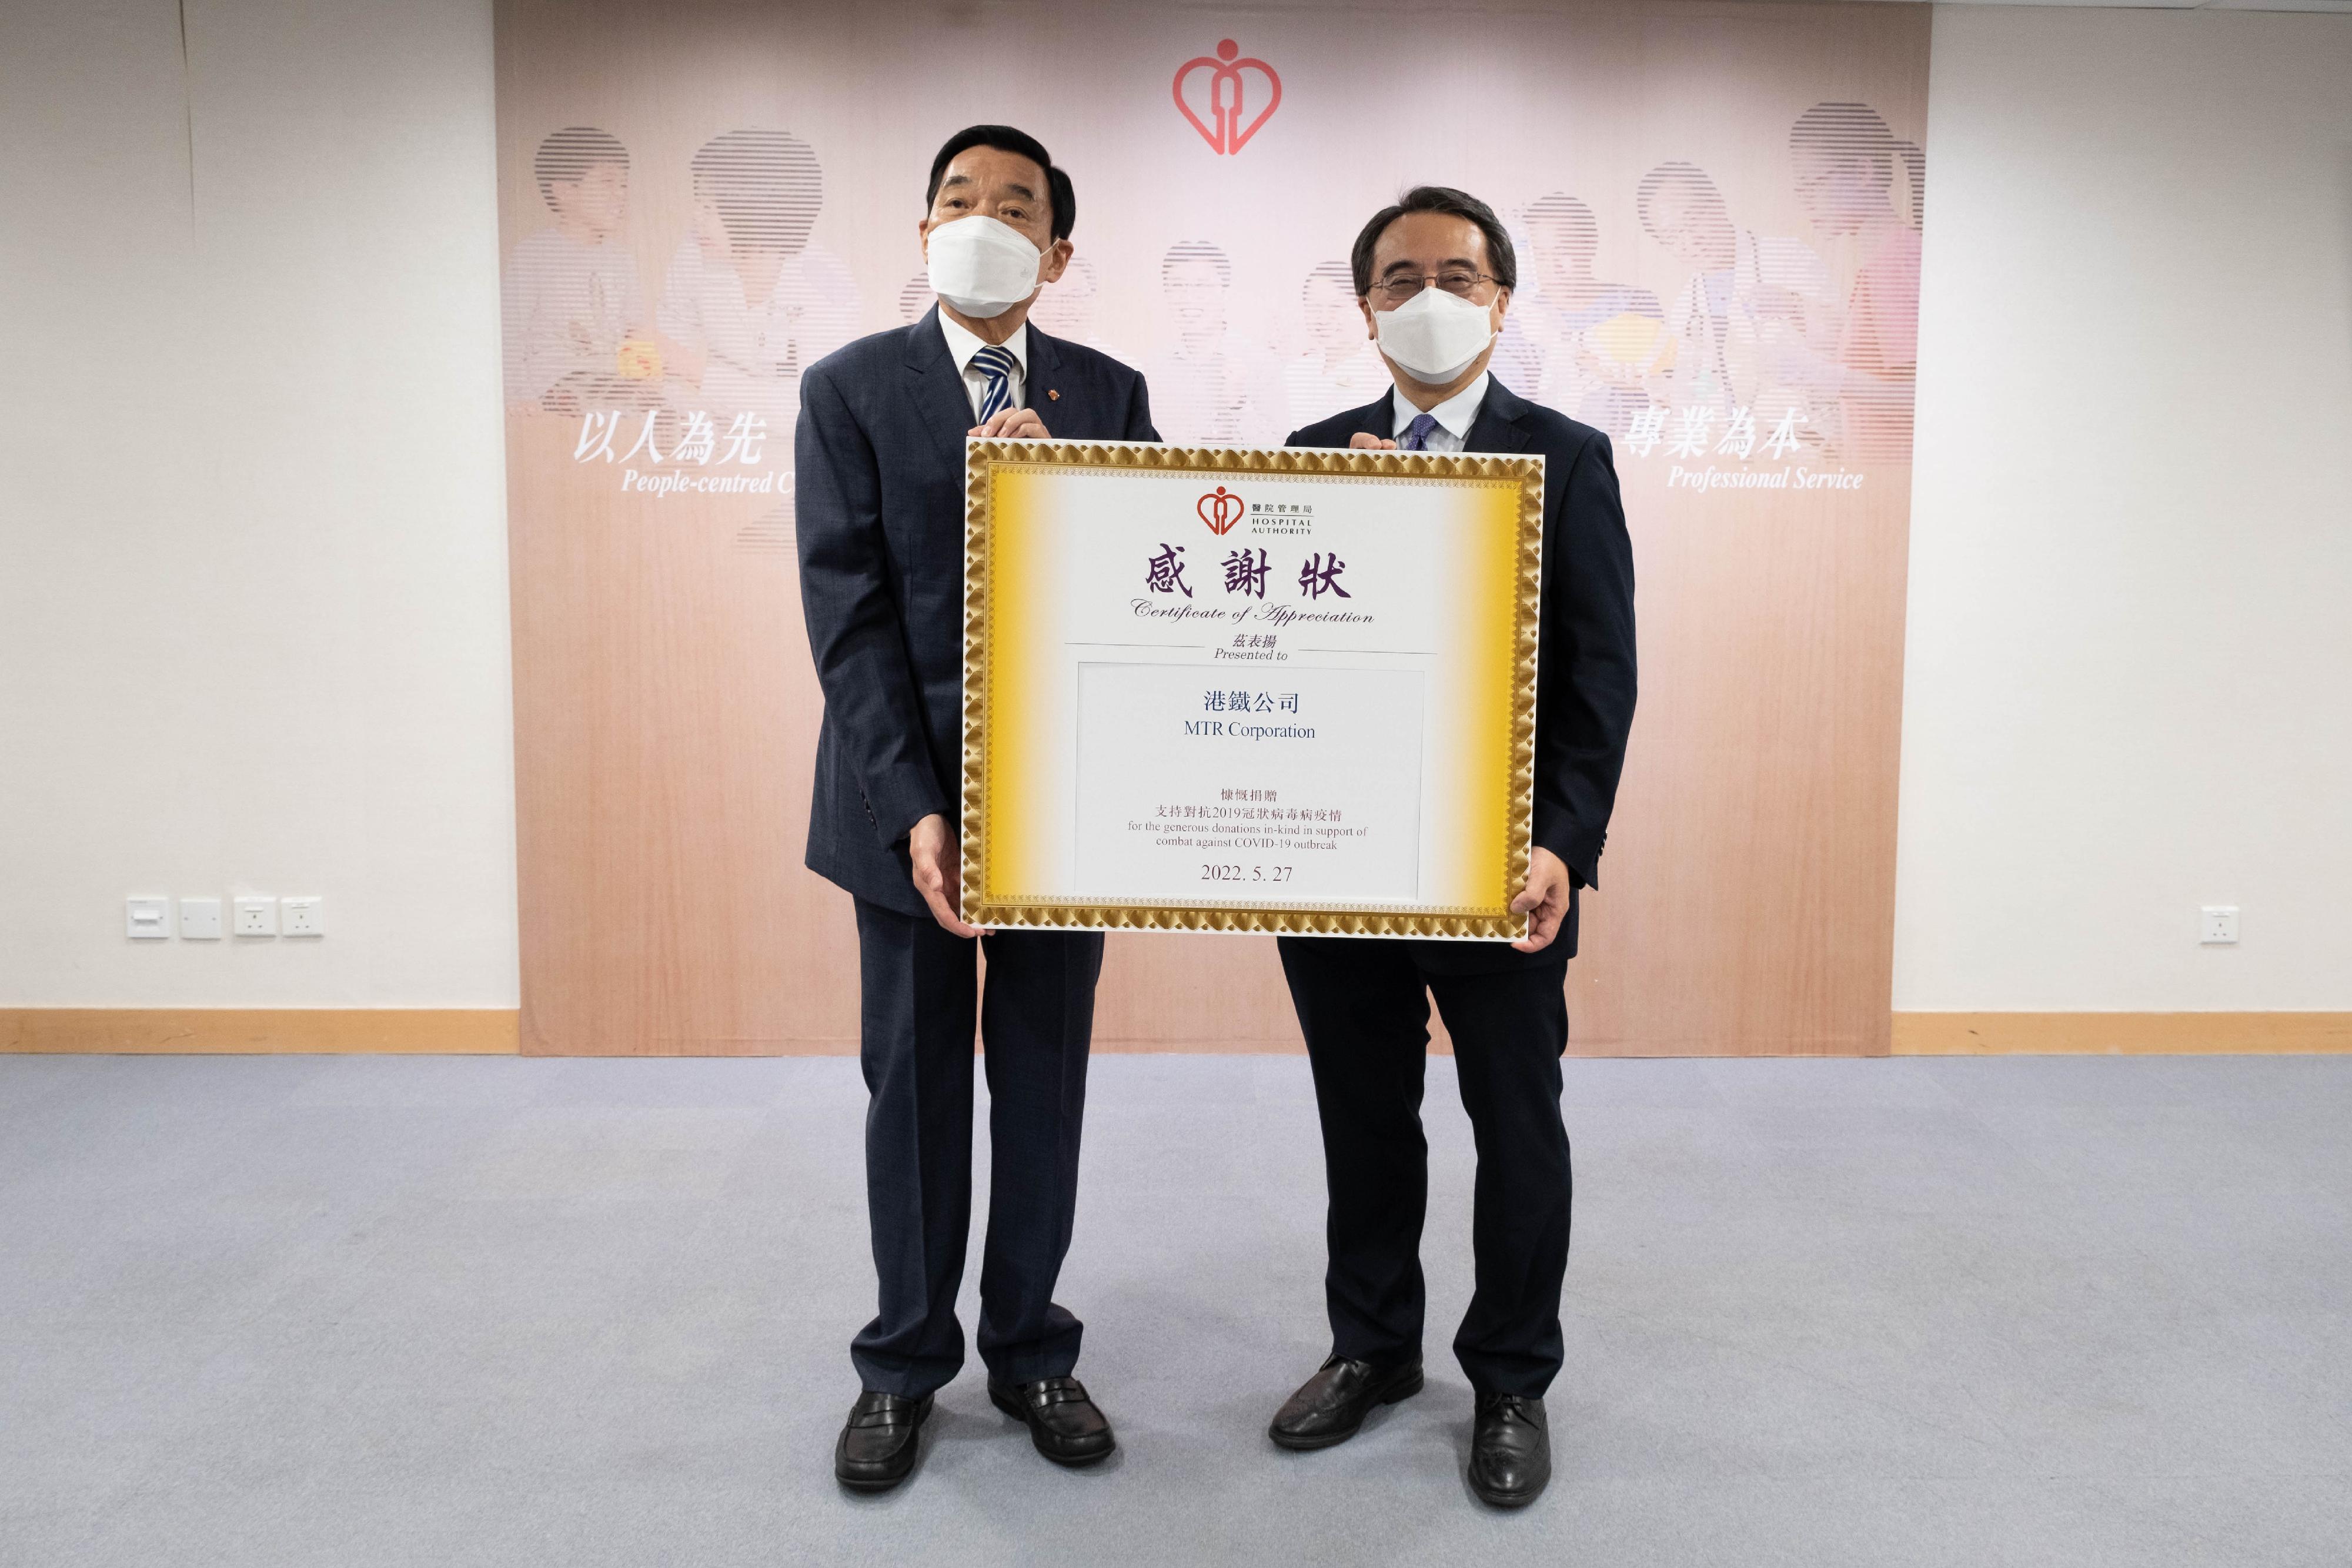 The Hospital Authority (HA) today (May 27) expressed its heartfelt appreciation to the MTR Corporation Limited for its continuous support to HA staff in fighting against the epidemic since 2020. Photo shows the HA Chairman, Mr Henry Fan (left), at the cheque presentation ceremony.